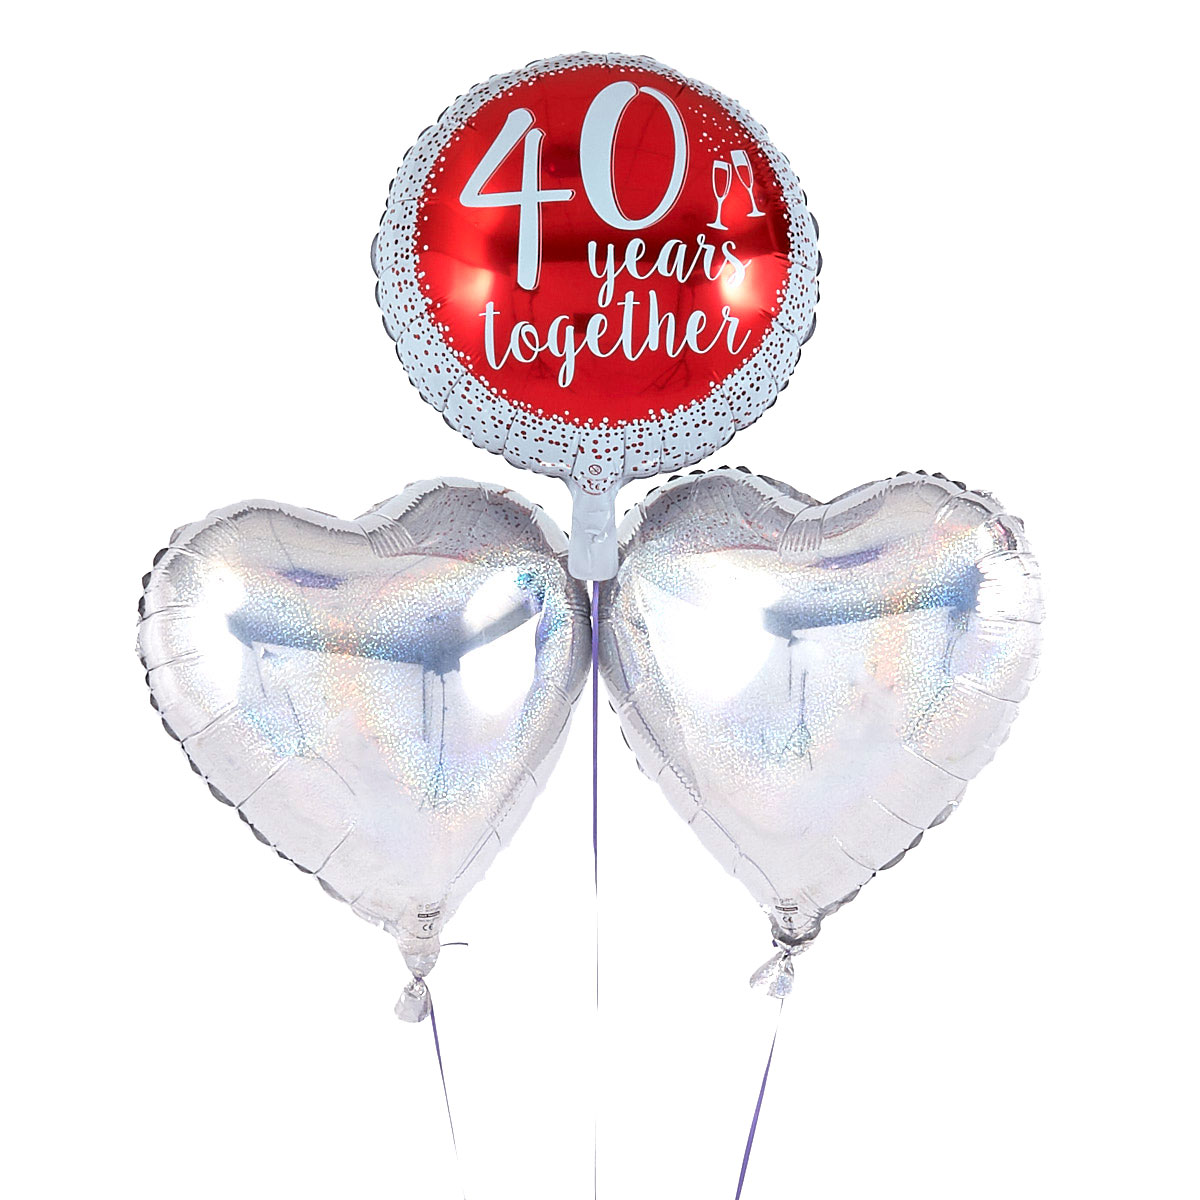 40th Anniversary Ruby Wedding Romantic Balloon Bouquet - DELIVERED INFLATED!